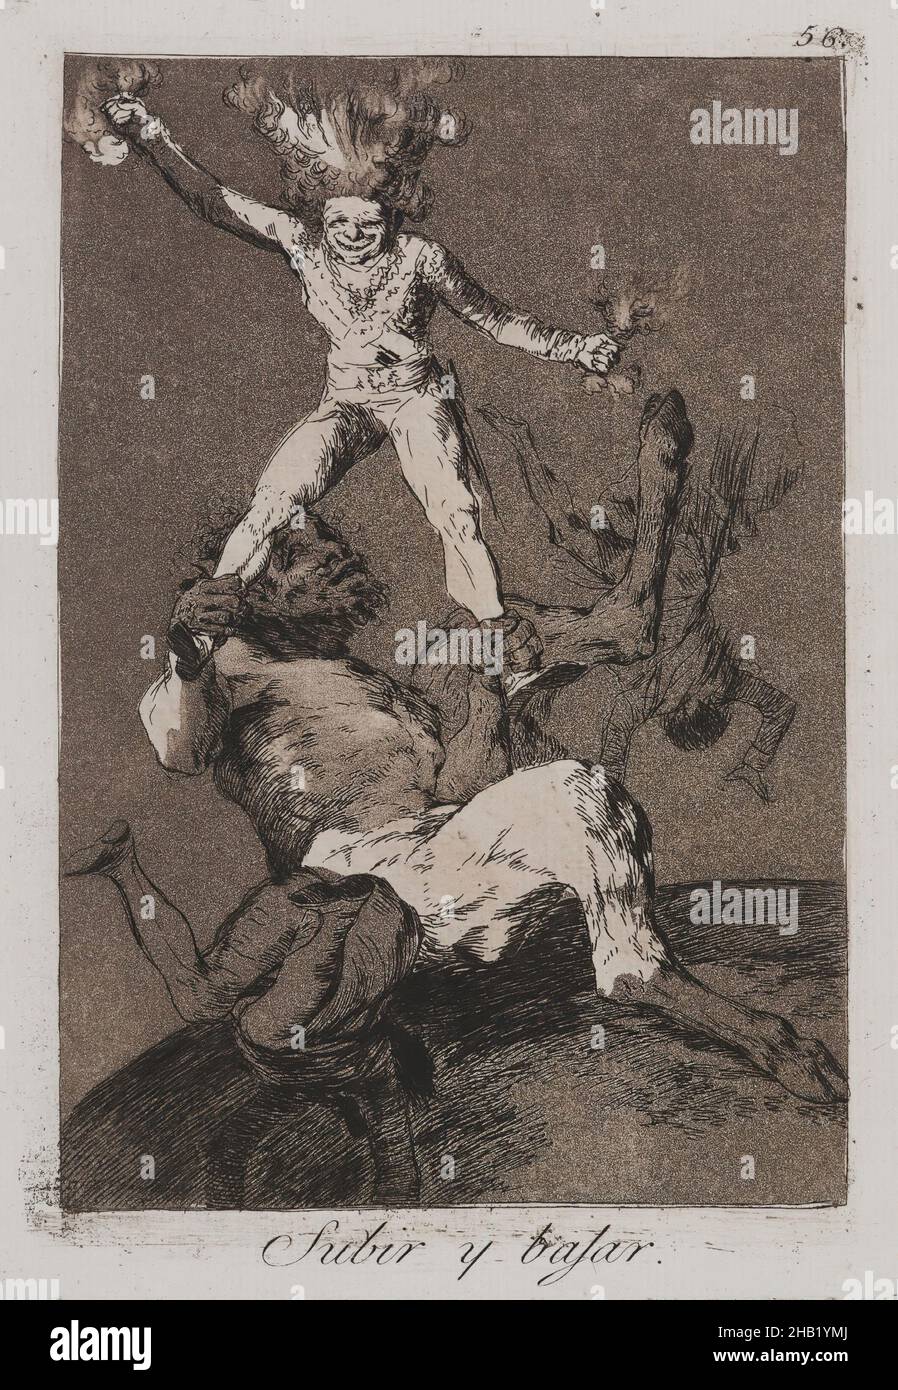 To Rise and Fall, Subir y bajar, Los Caprichos, Plate 56, Francisco de Goya y Lucientes, Spanish, 1746-1828, Etching and aquatint on laid paper, Spain, 1797-1798, Sheet: 11 7/8 x 8 in., 30.2 x 20.3 cm, Aquatint, Engraving, Etching, Print, Satire, Satirical, Spain, Spanish Stock Photo